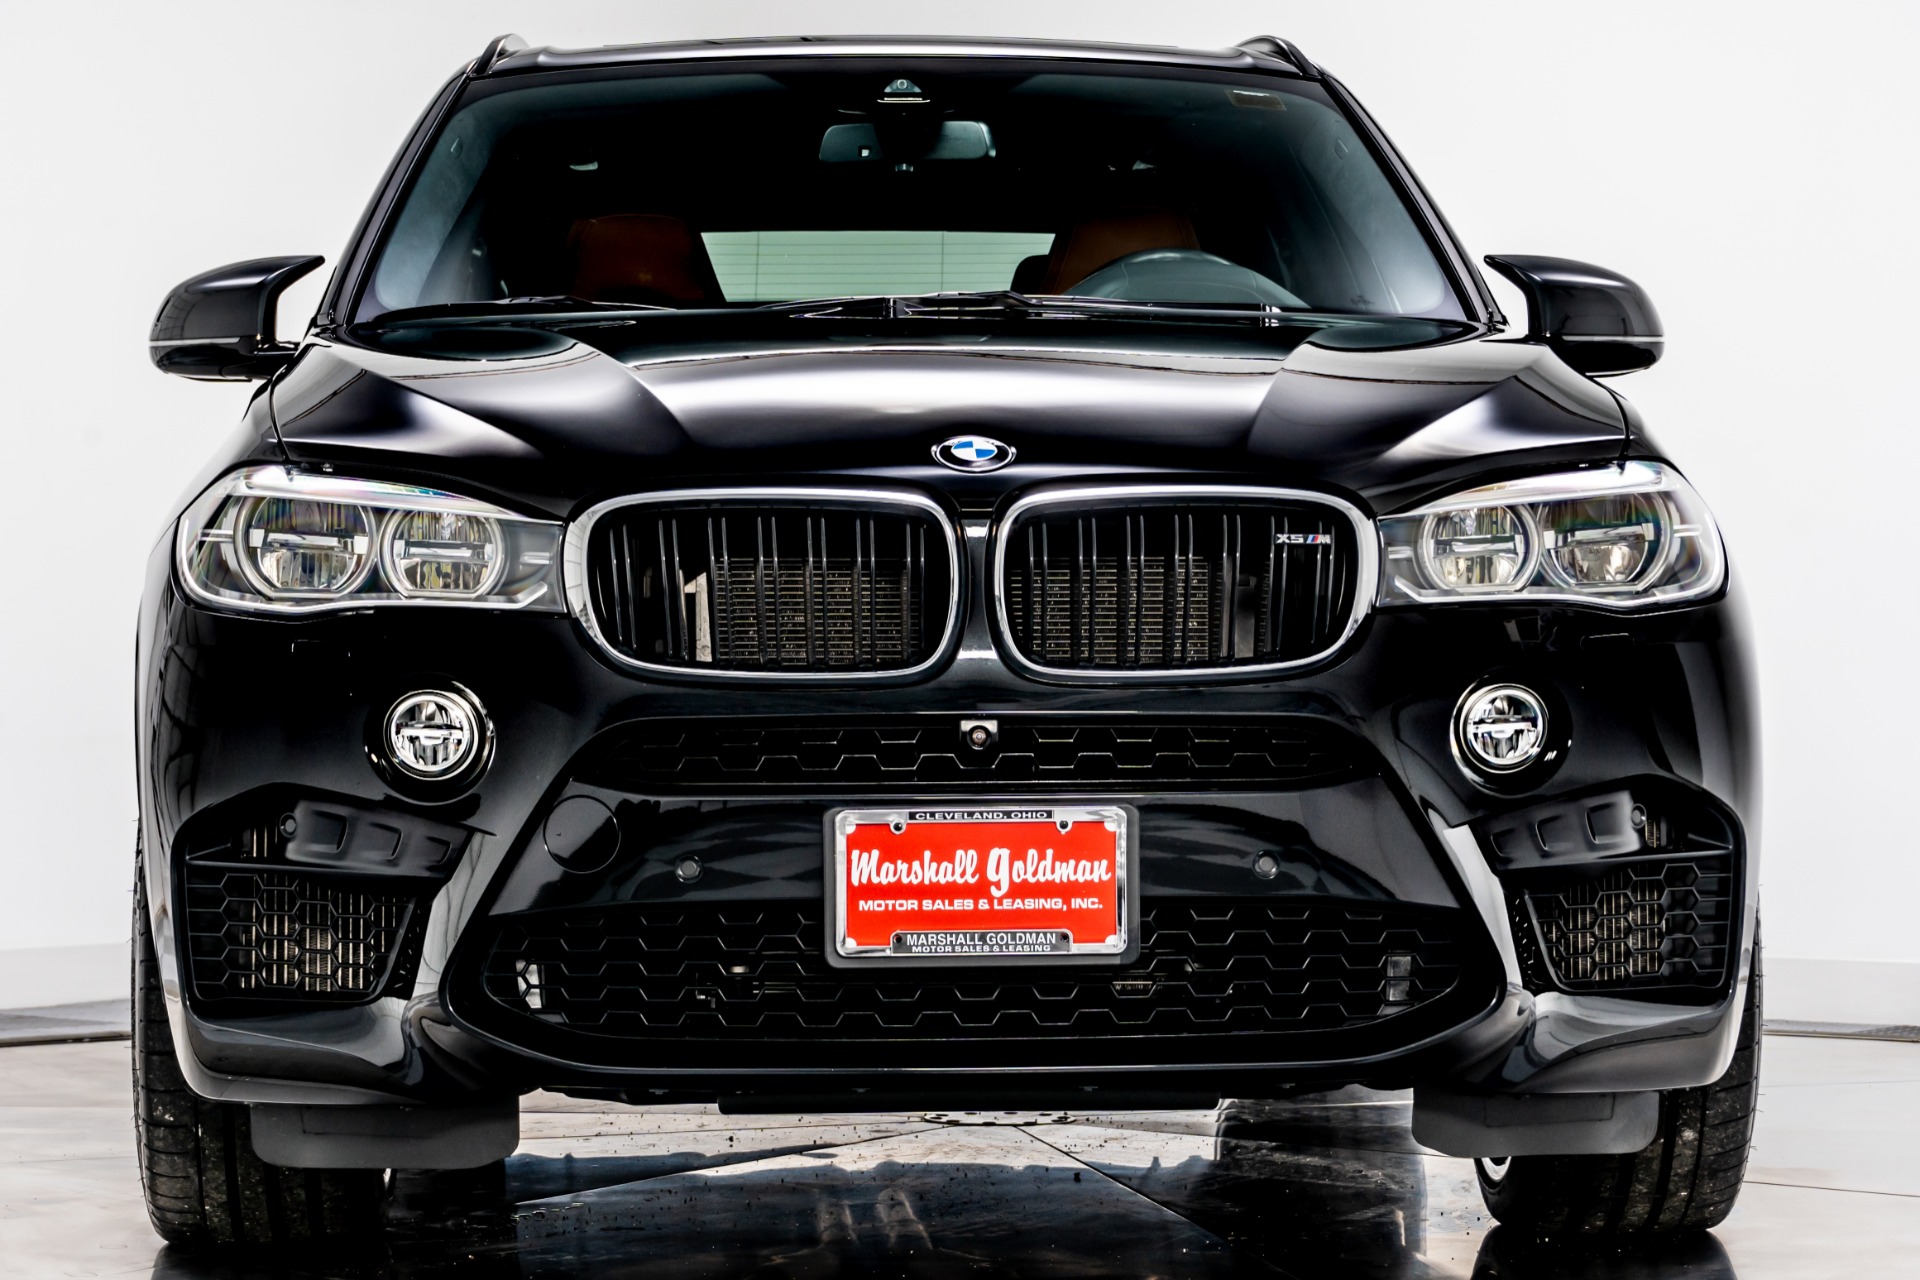 Used BMW X5 M 2015-2018 review